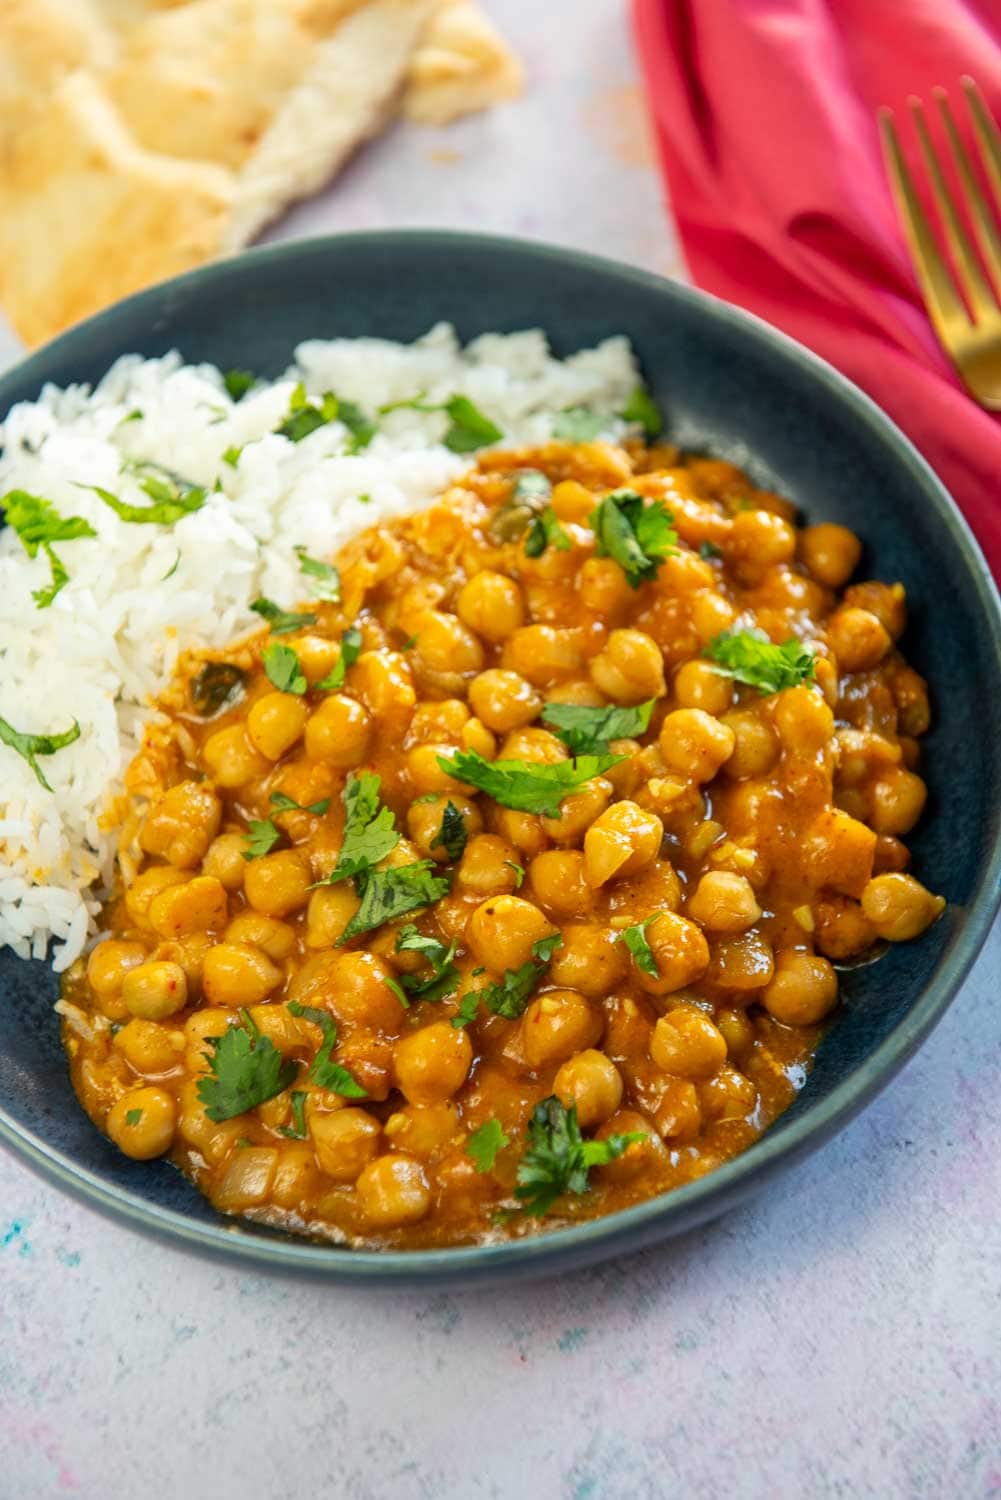 chickpeas in a curry sauce with rice on blue plate